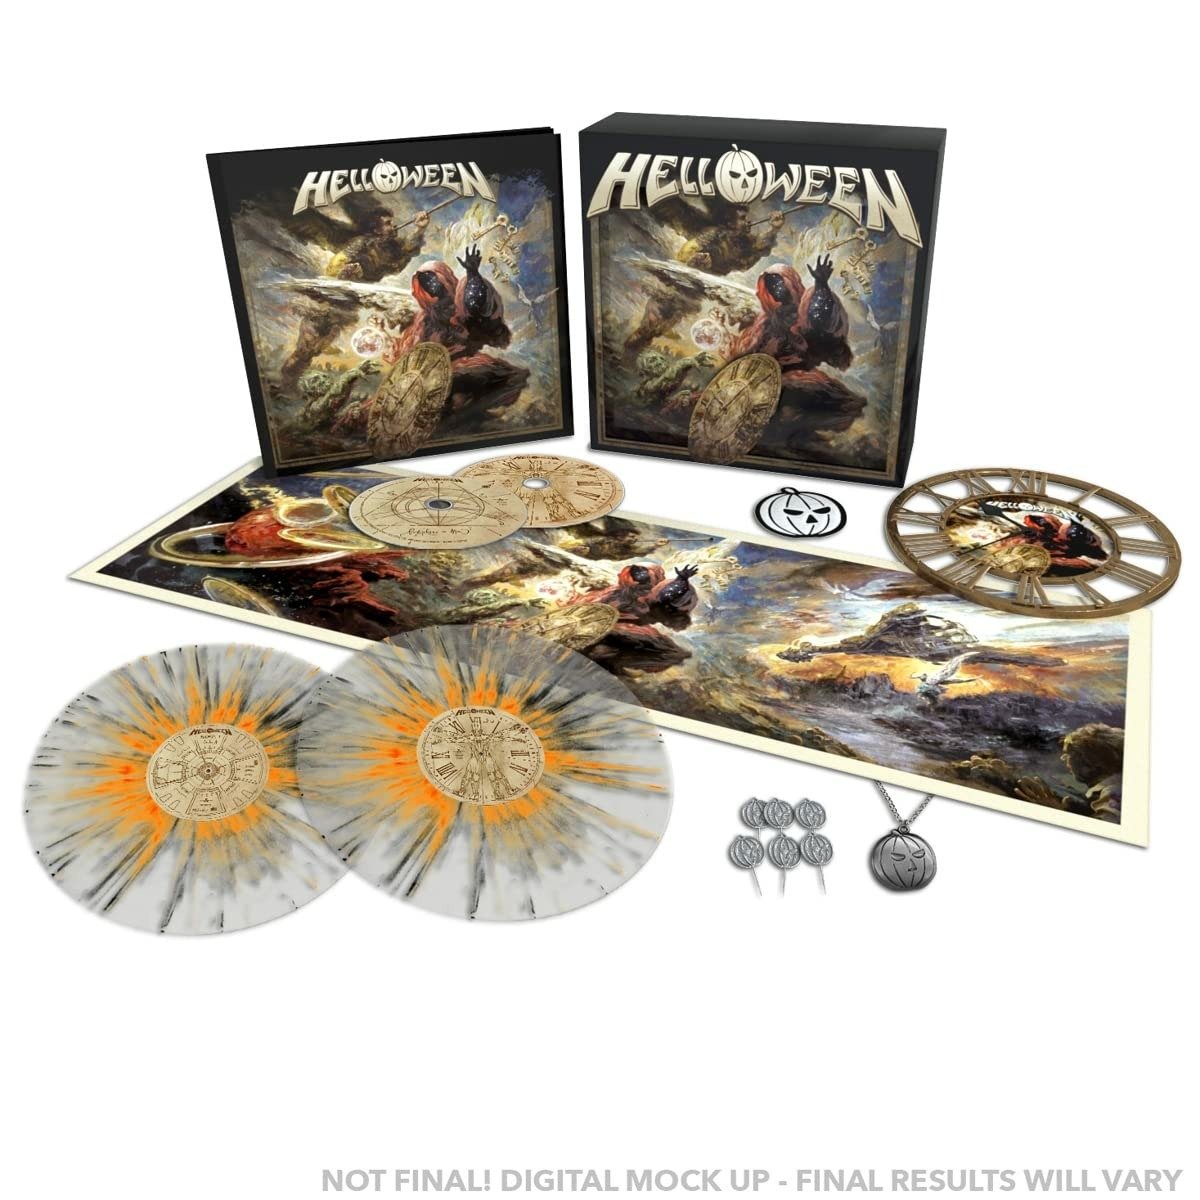 HELLOWEEN (LIMITED EDITION)